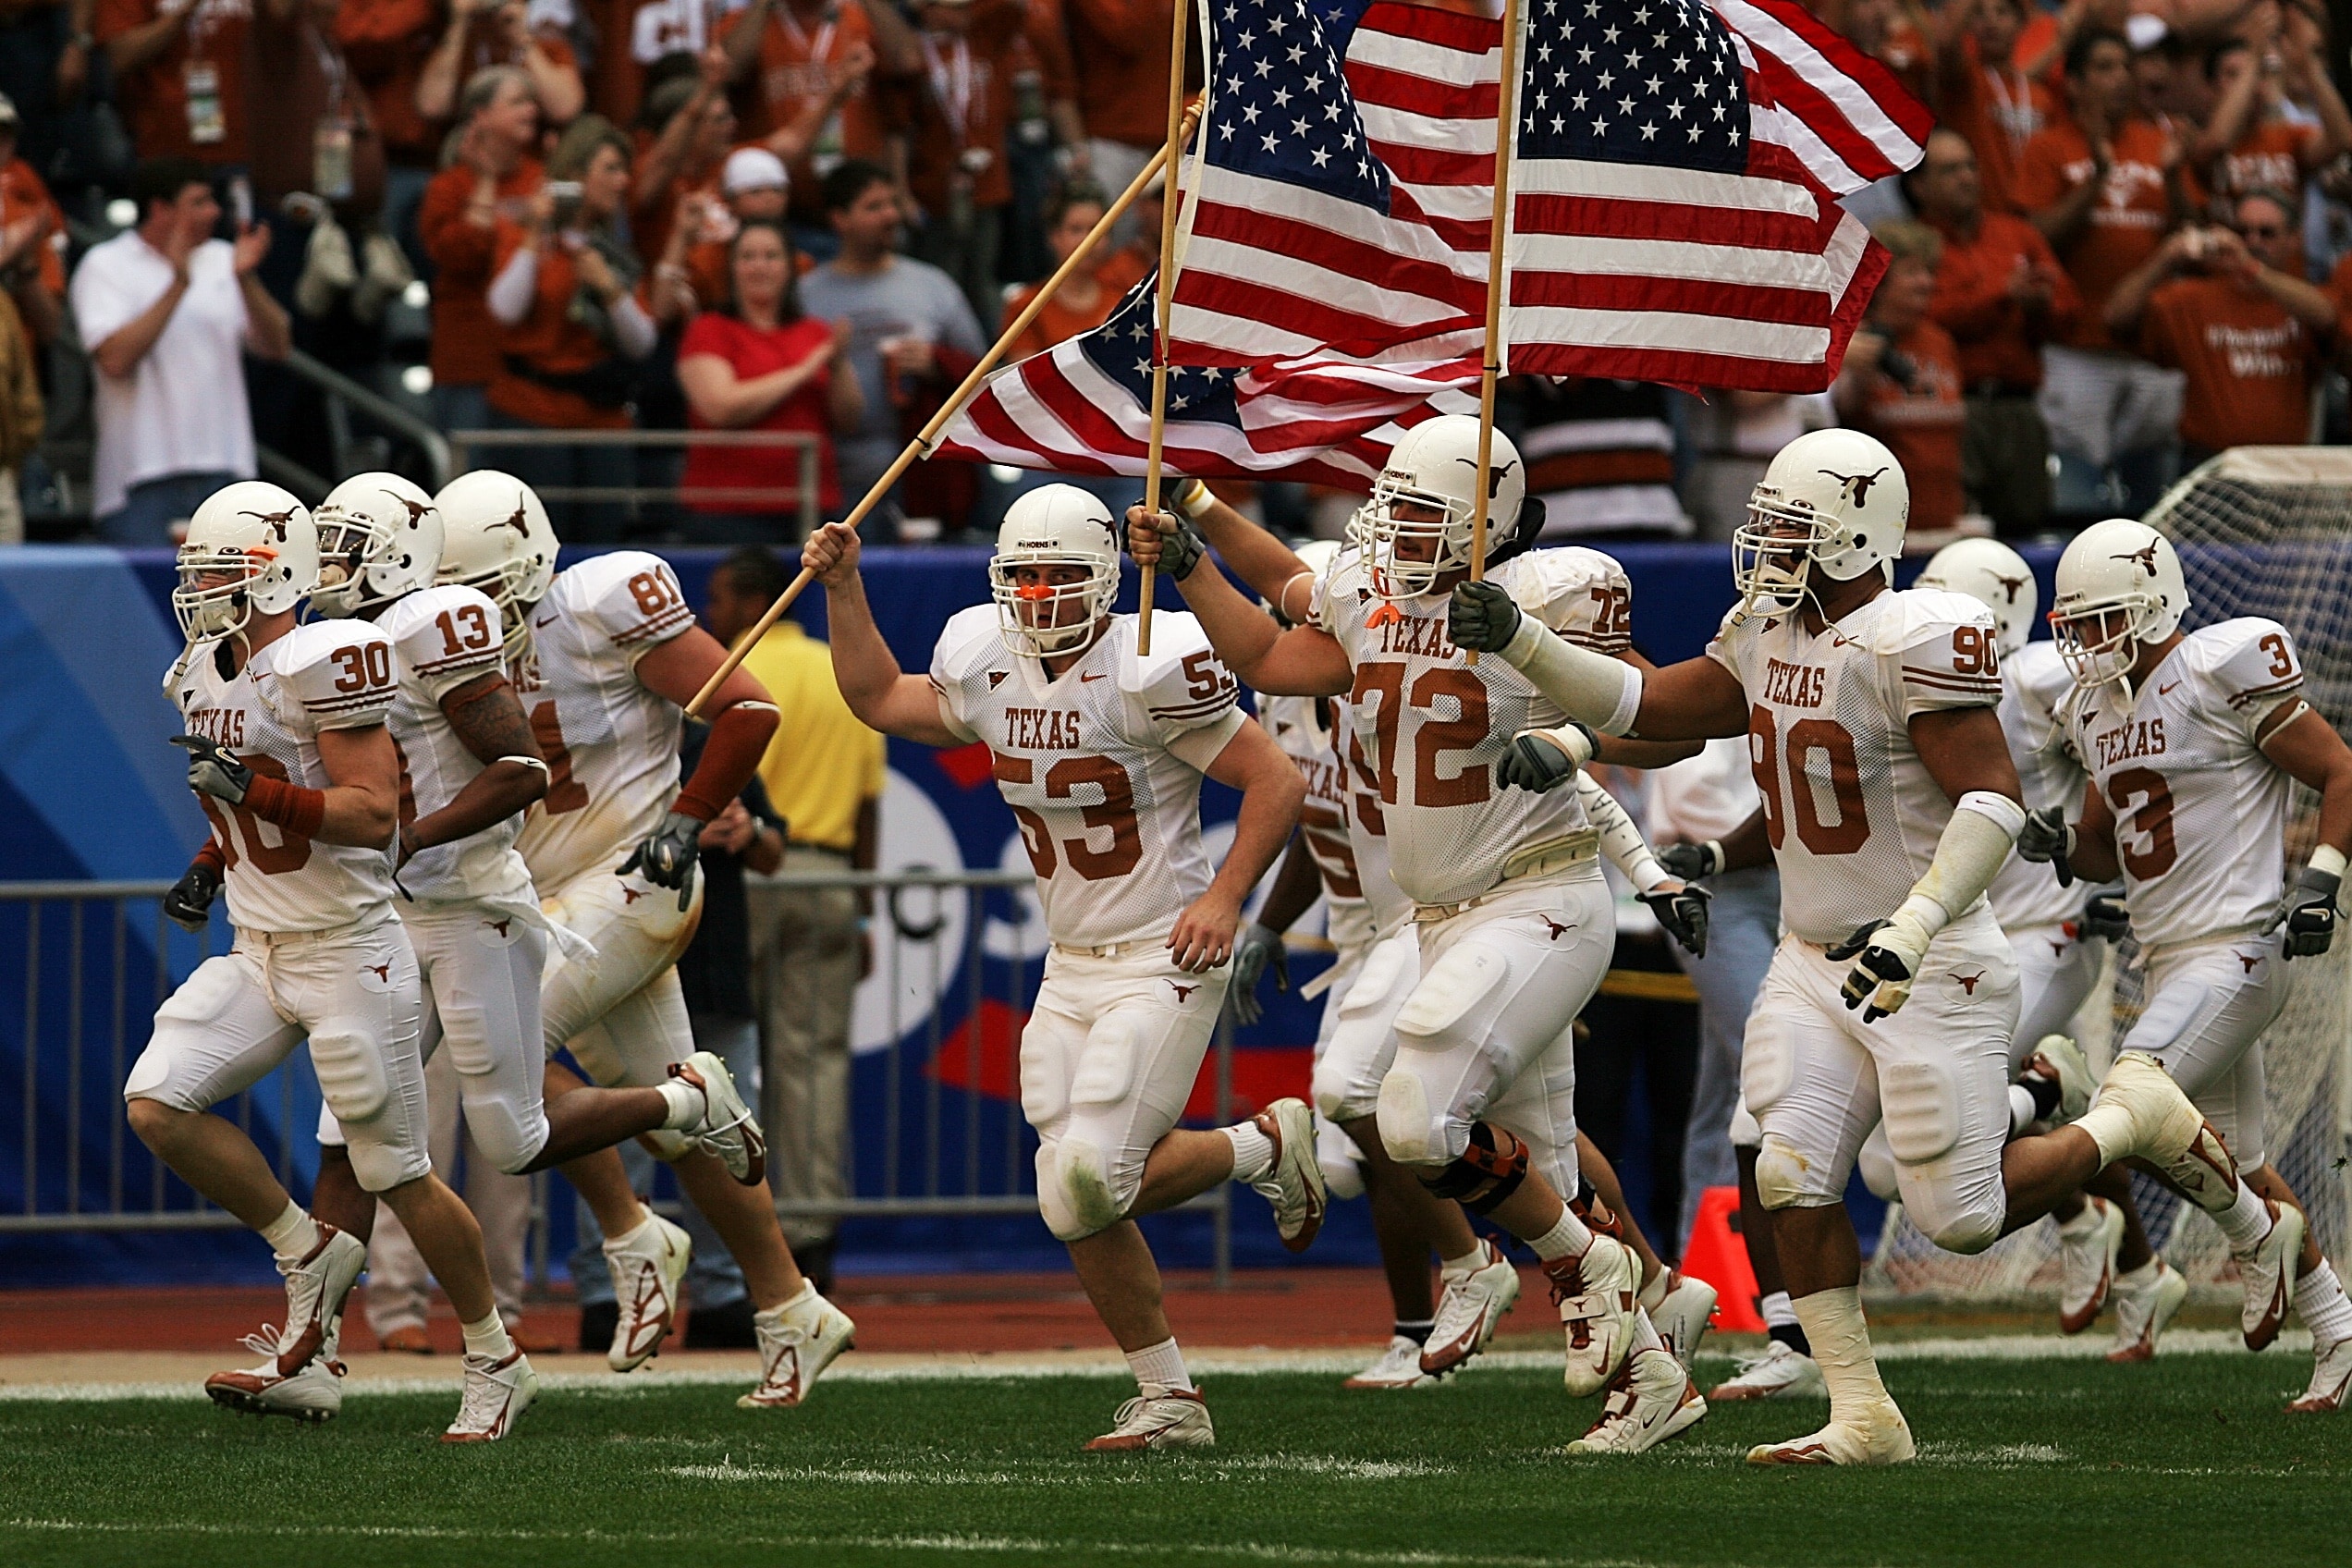 football in white jersey team running with american flag free image